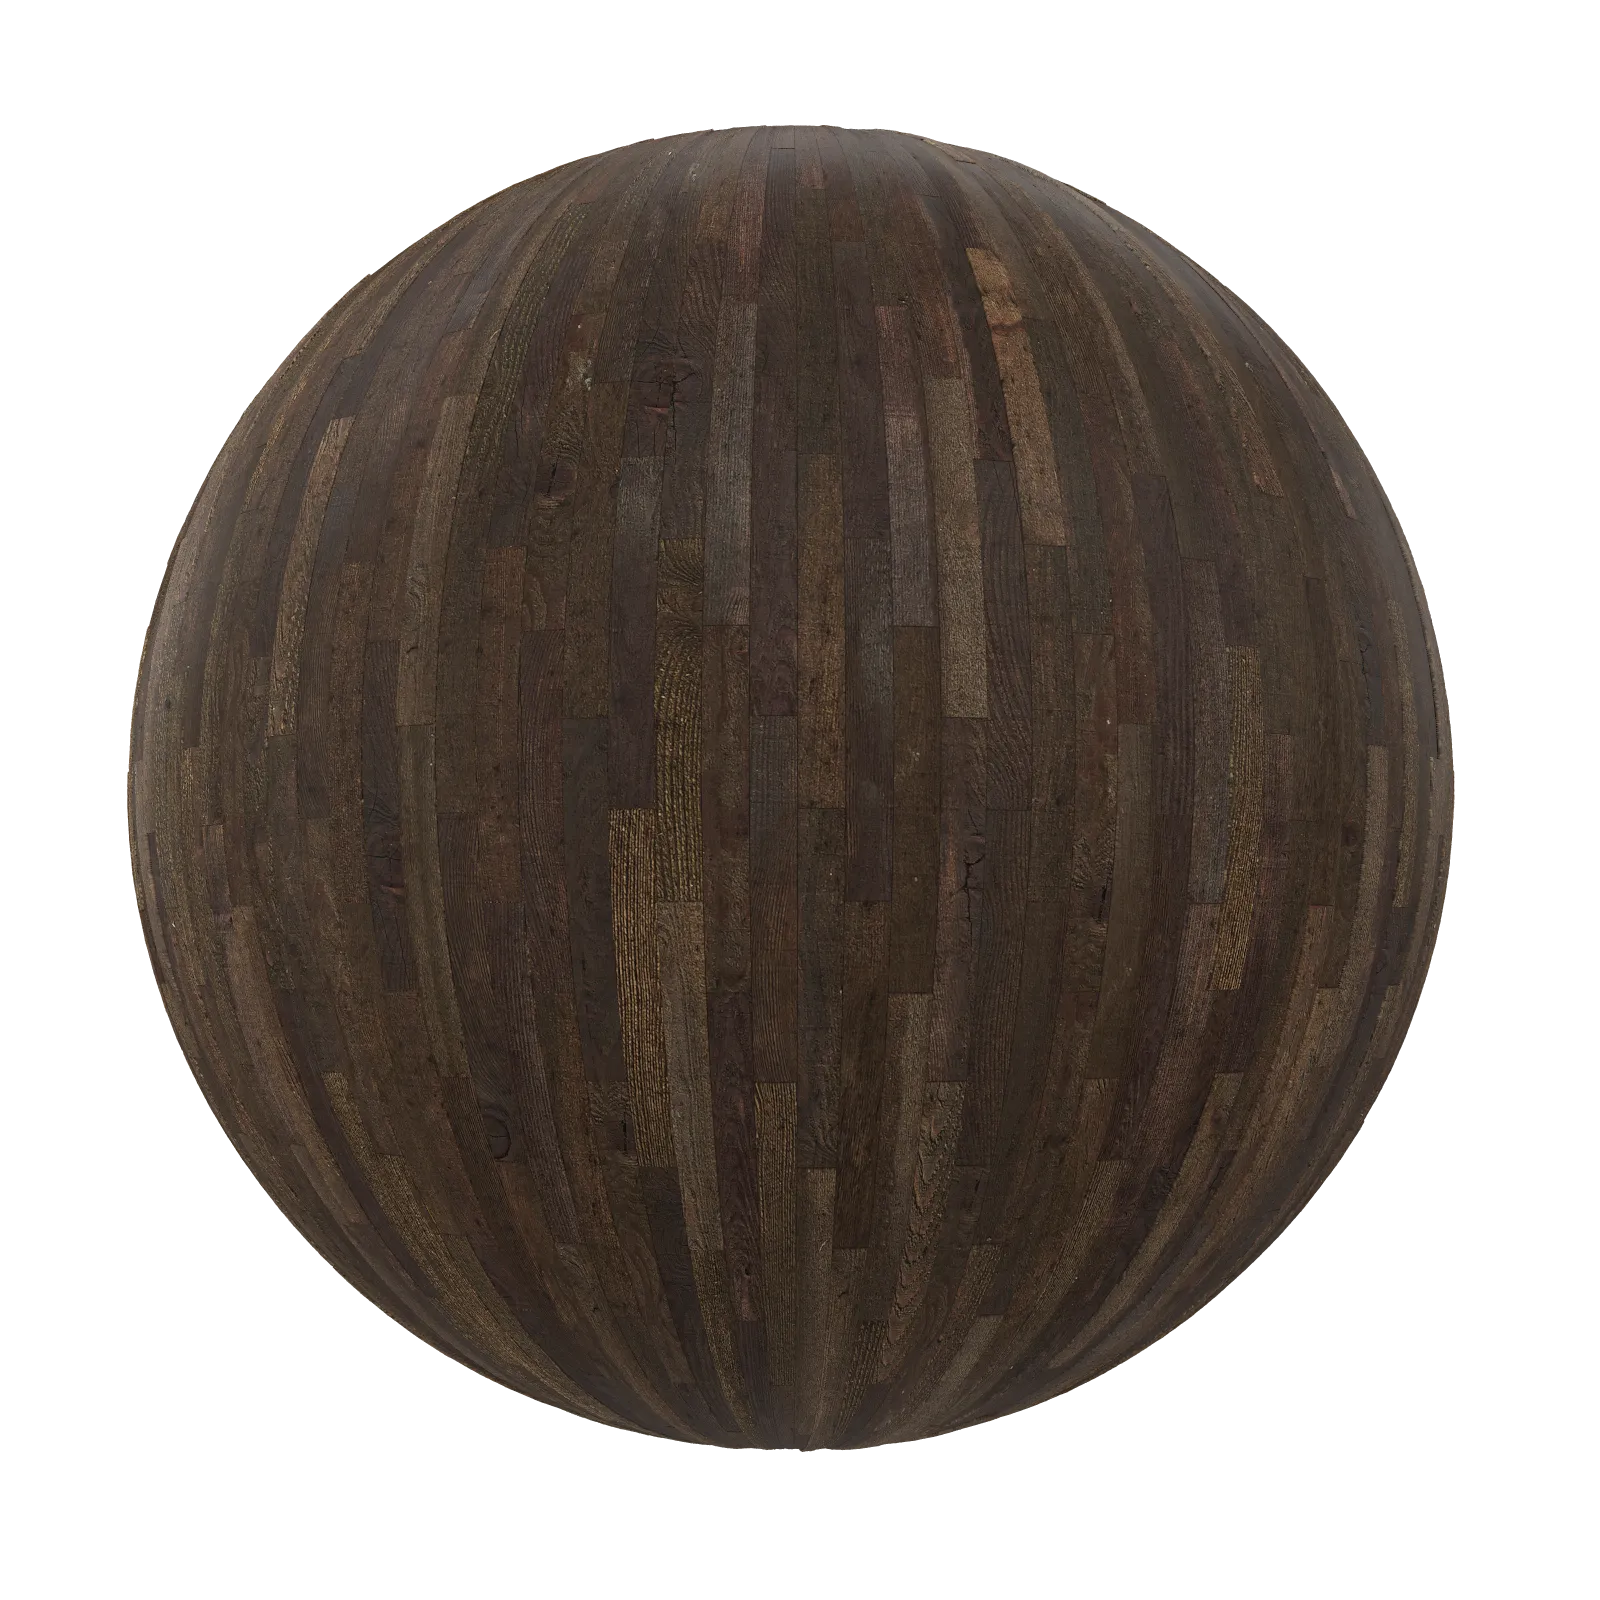 TEXTURES – WOOD – Old Wood Tiles 14